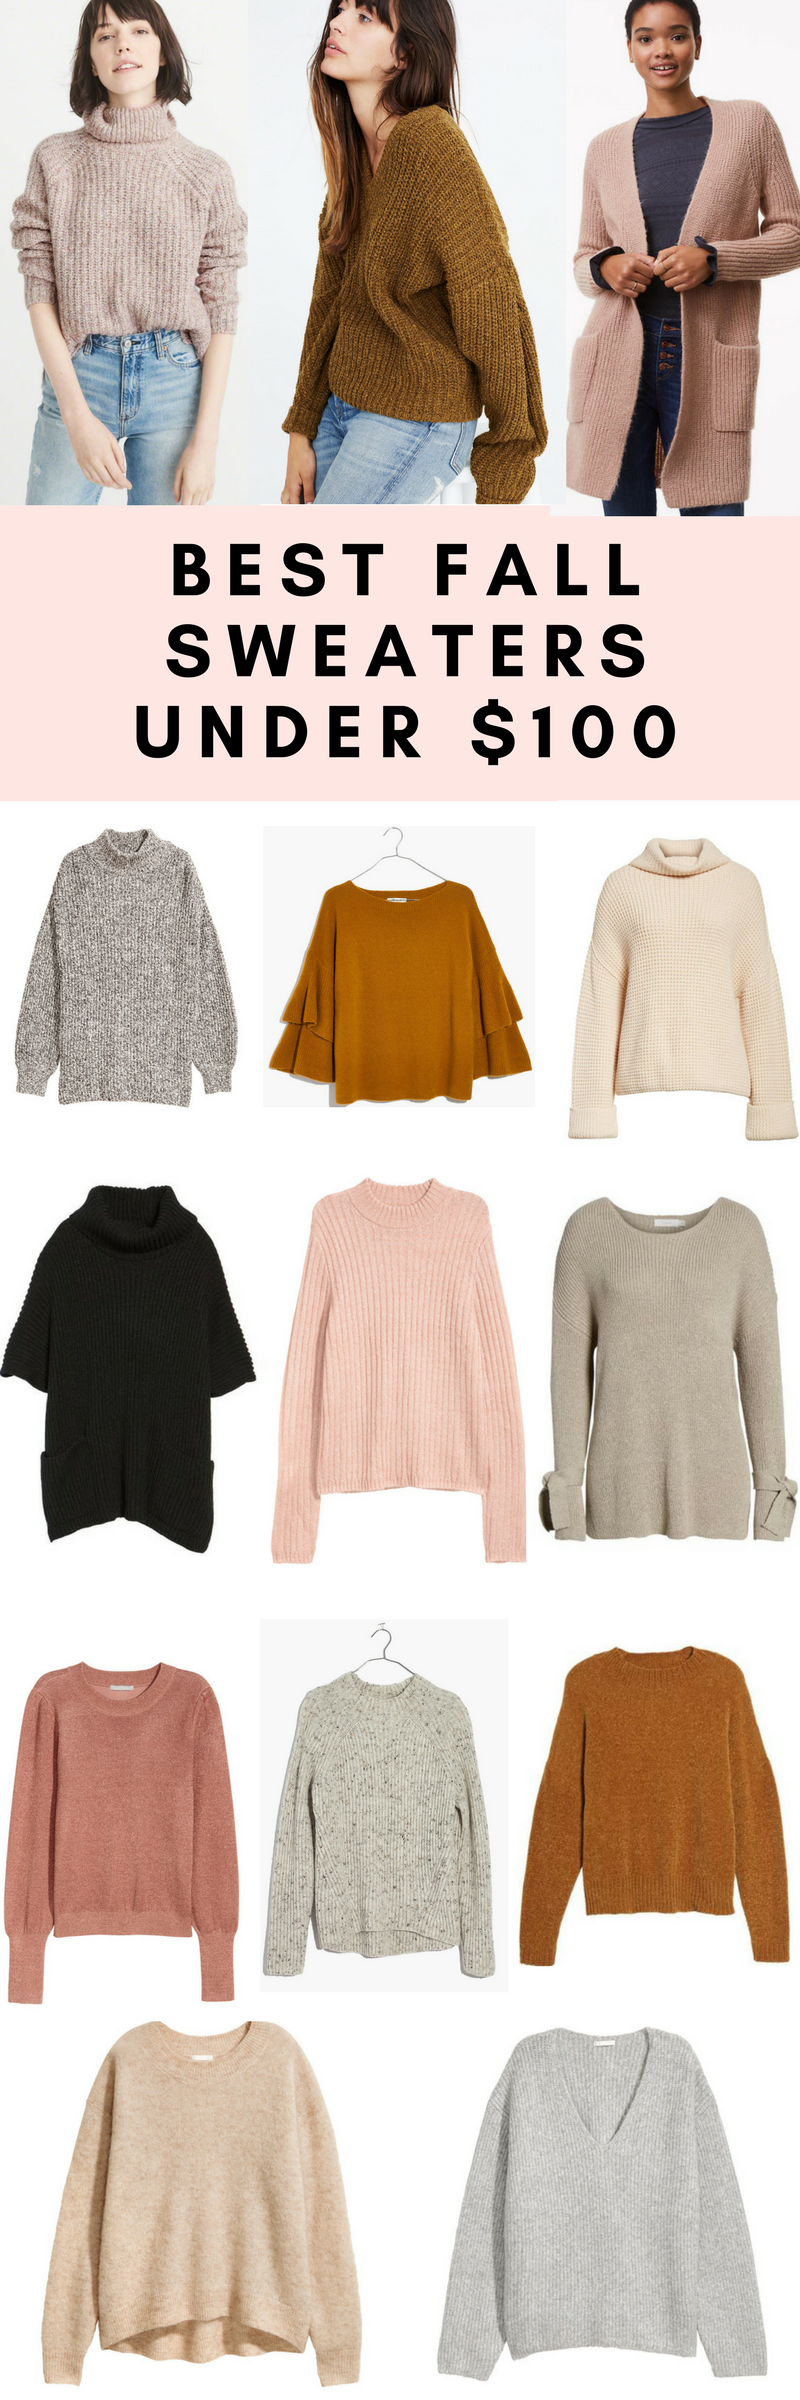 The Best Fall Sweaters Under $100 - The Mama Notes